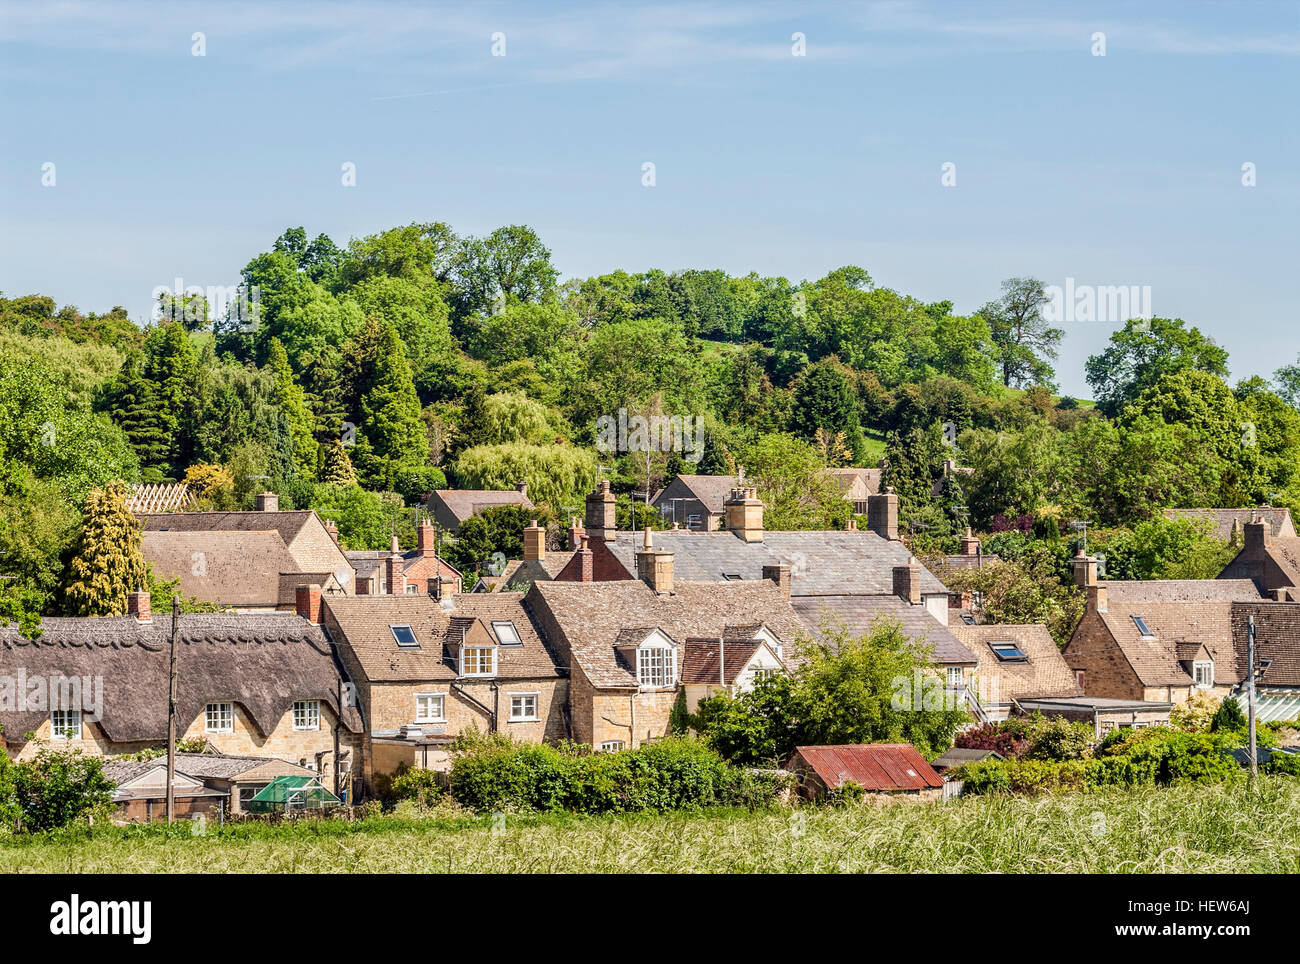 Chipping Campden a small market town within the Cotswold district of Gloucestershire, England. Stock Photo